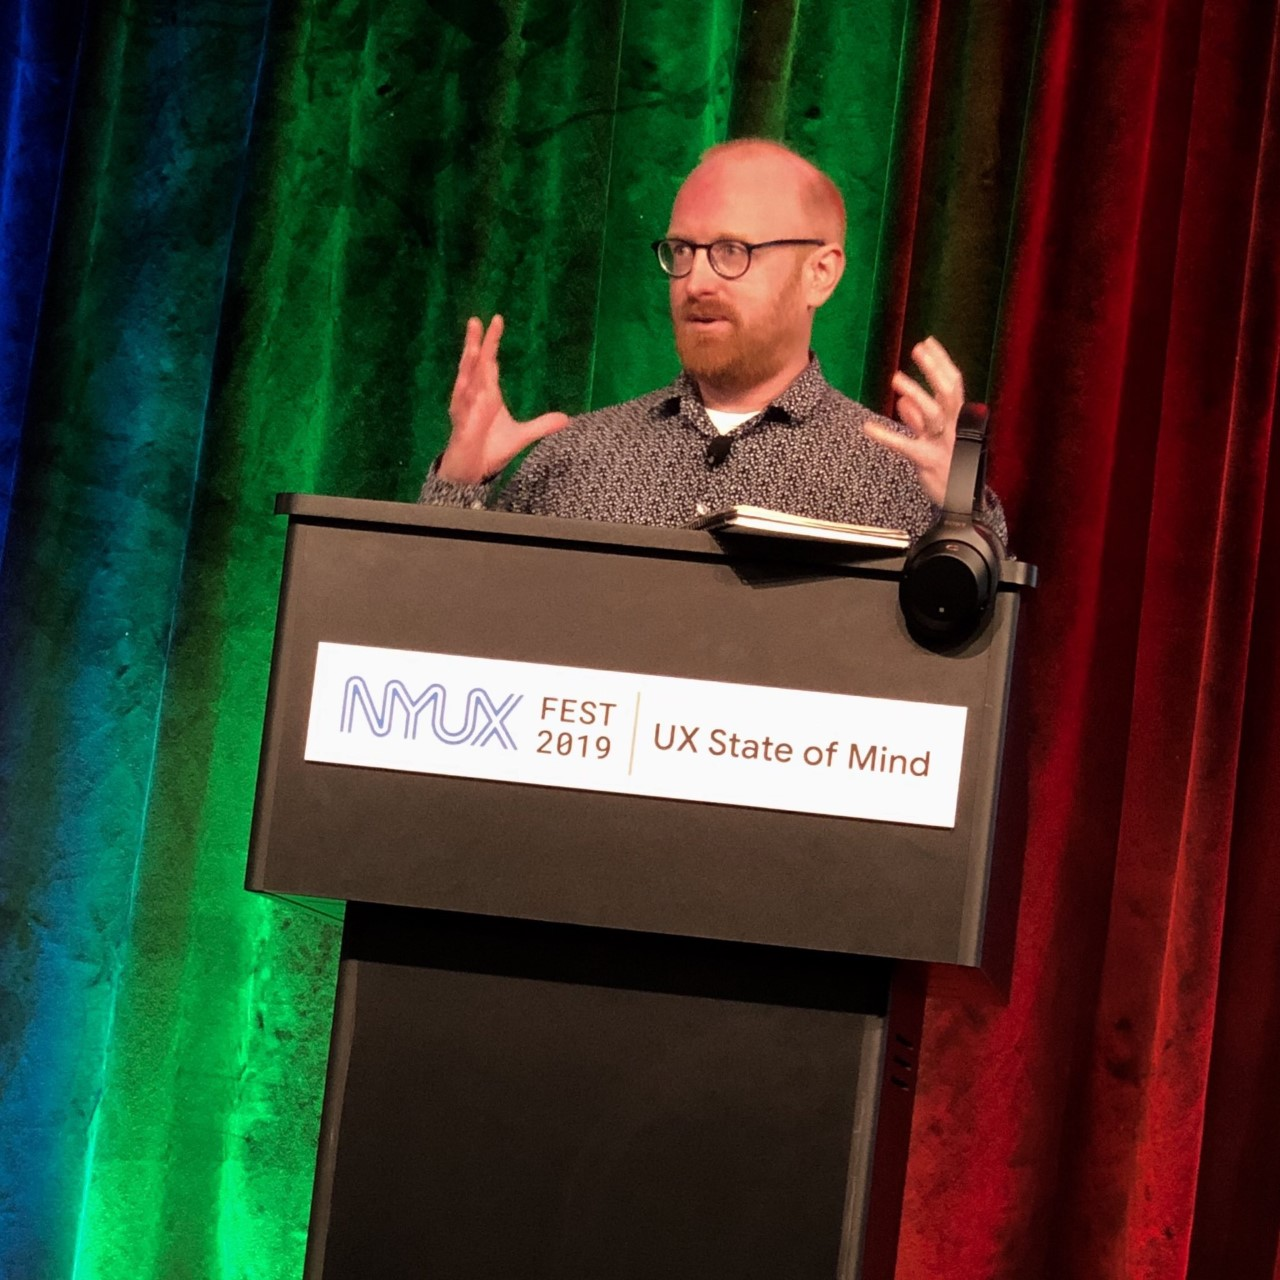 Matt May, Head of Inclusive Design at Adobe standing in front of a podium while presenting at the NYUX Fest 2019.